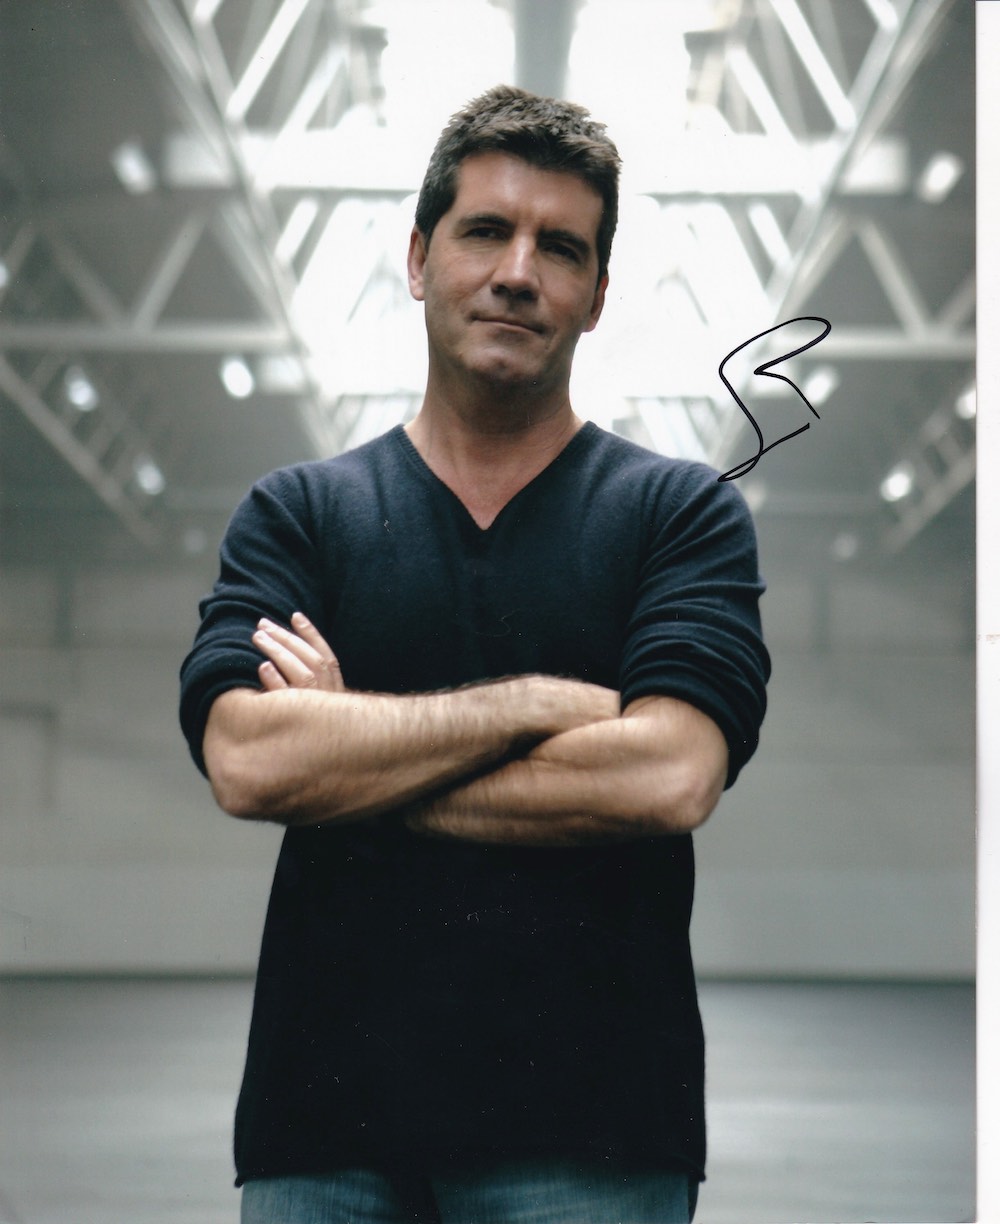 Simon Cowell X Factor Judge and Creator 10x8 inch Signed Photo. Good Condition. All autographs